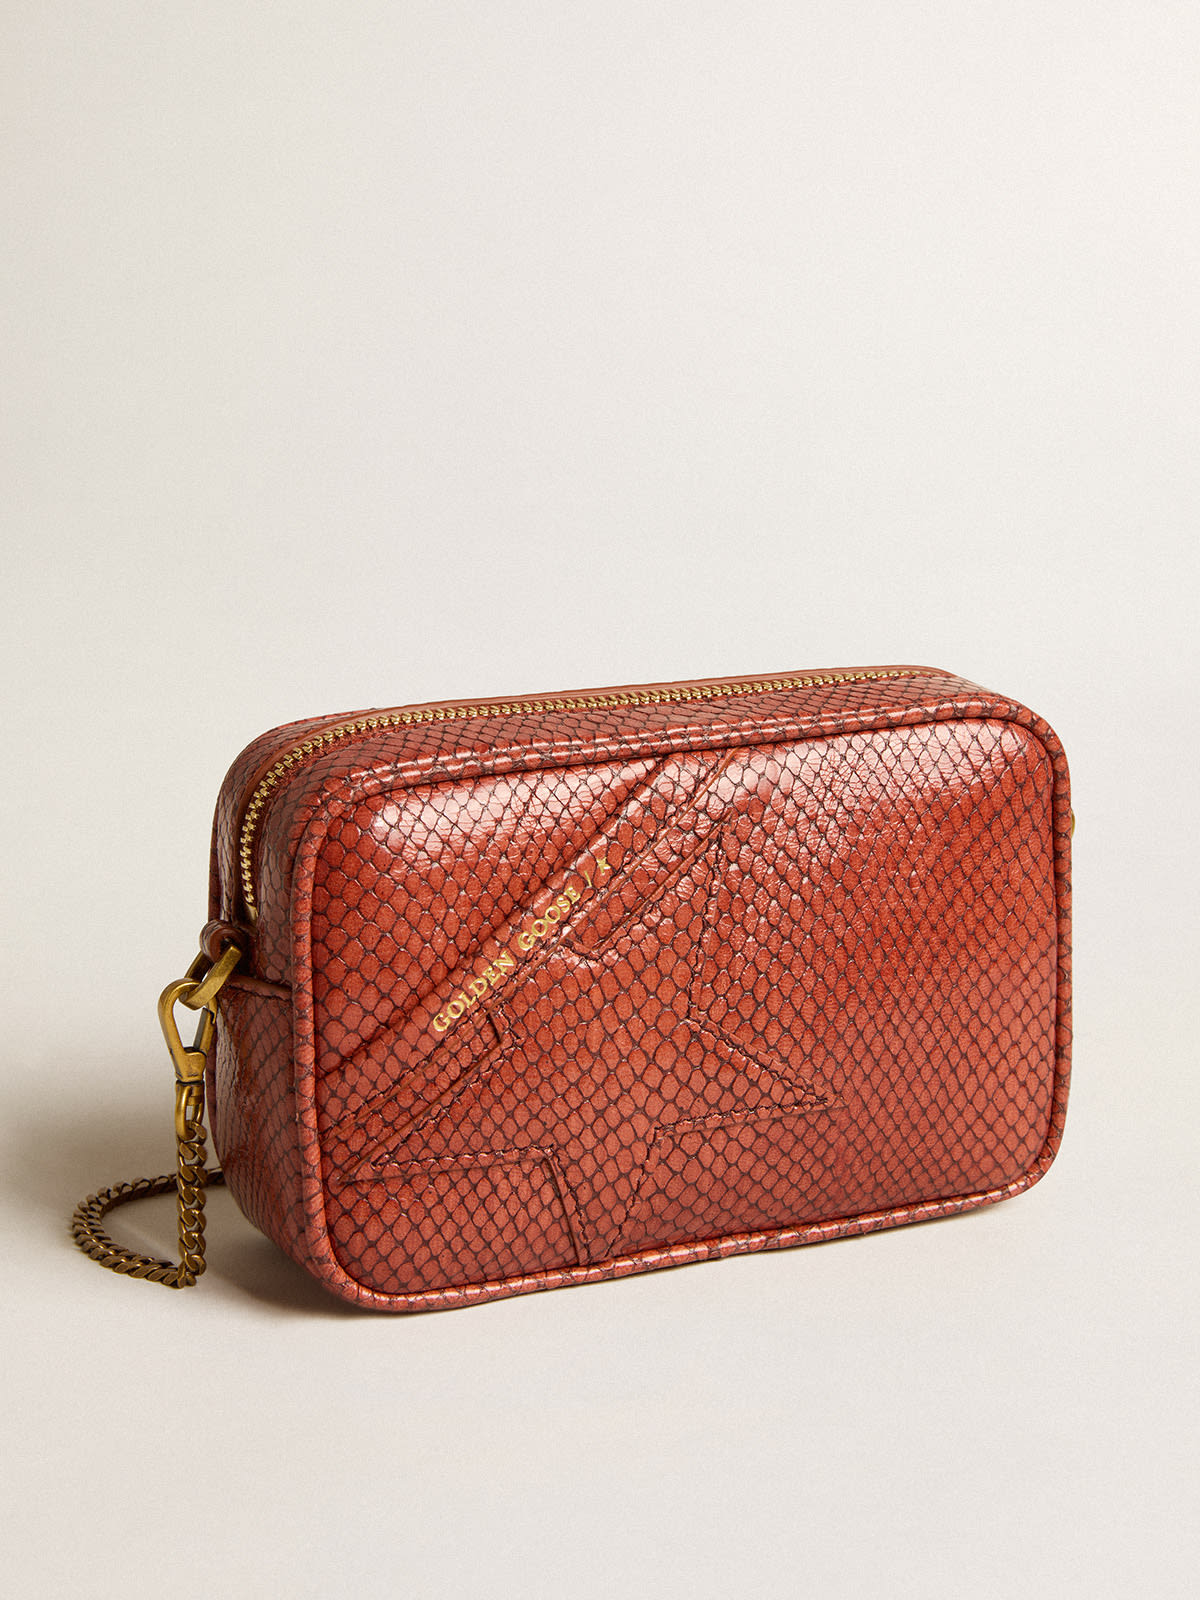 Golden Goose - Mini Star Bag in rust-colored snake-print leather in 